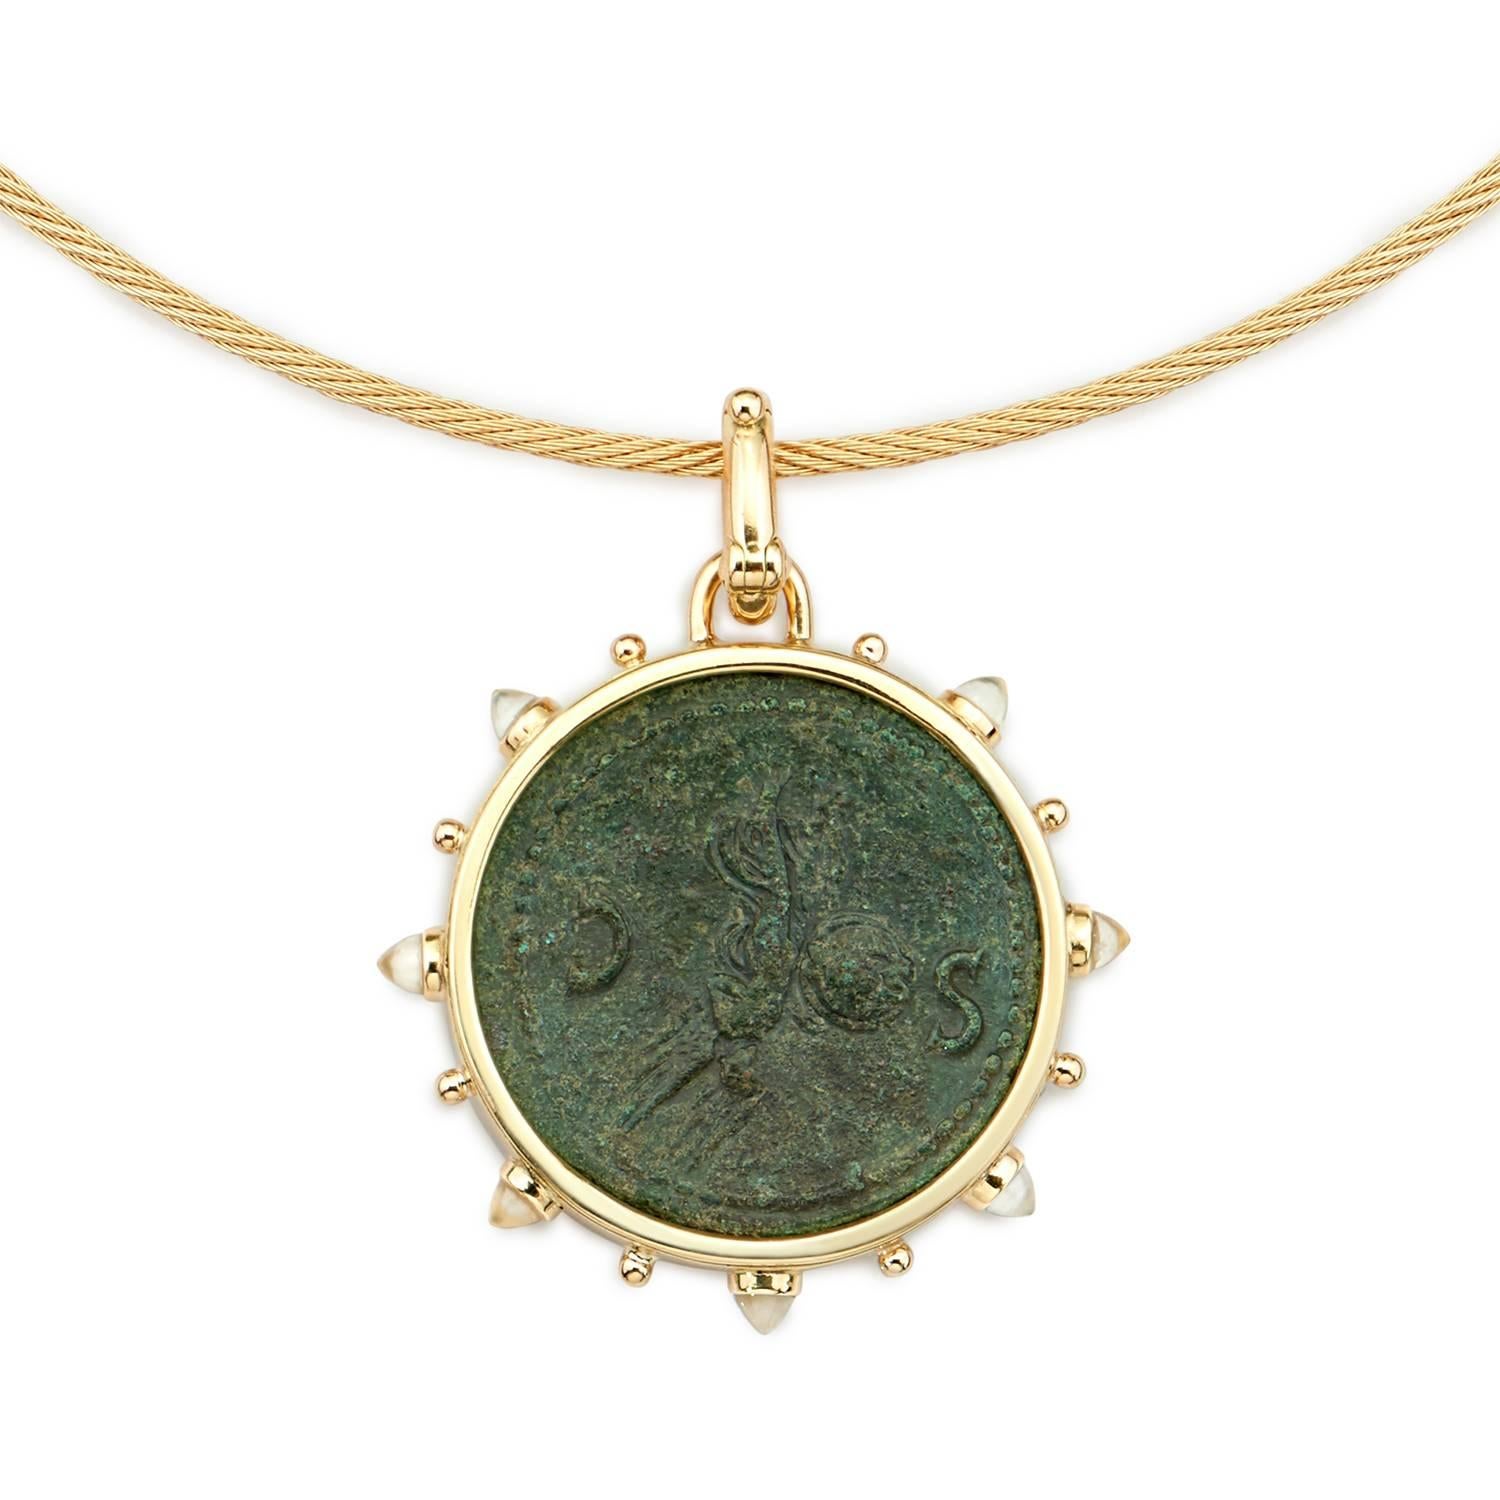 This DUBINI coin necklace from the 'Empires' collection features authentic bronze roman coin of Nero minted circa 54-68 A.D. set in 18K yellow gold with moonstone bullet cabochon on a twisted rope choker.

* Due to the unique process of hand carving